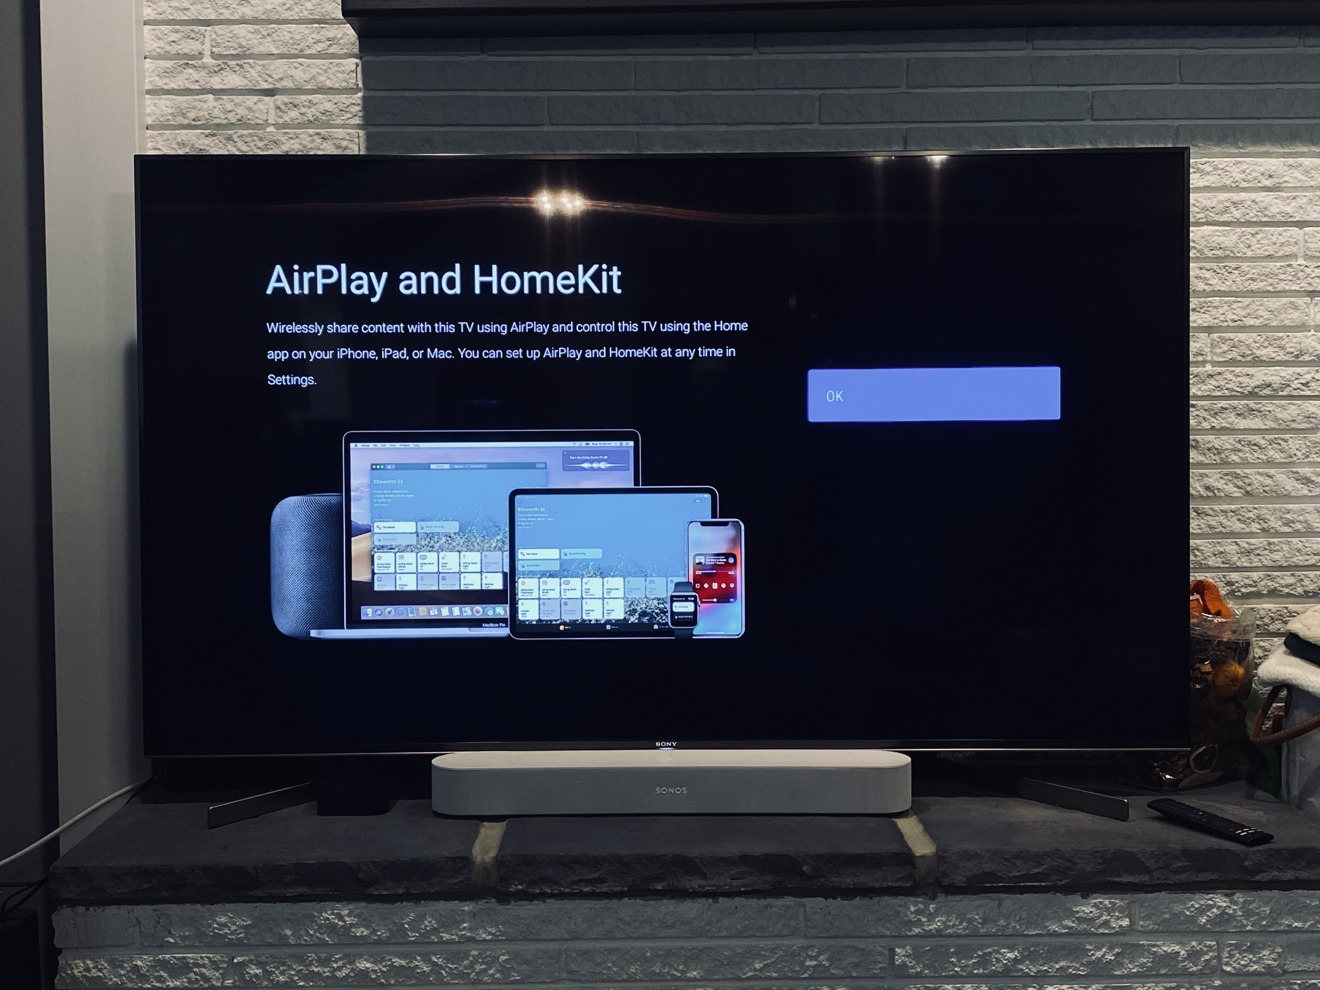 Hot And Airplay 2 On Sony Smart Tvs, How To Do Screen Mirroring With Iphone And Sony Tv